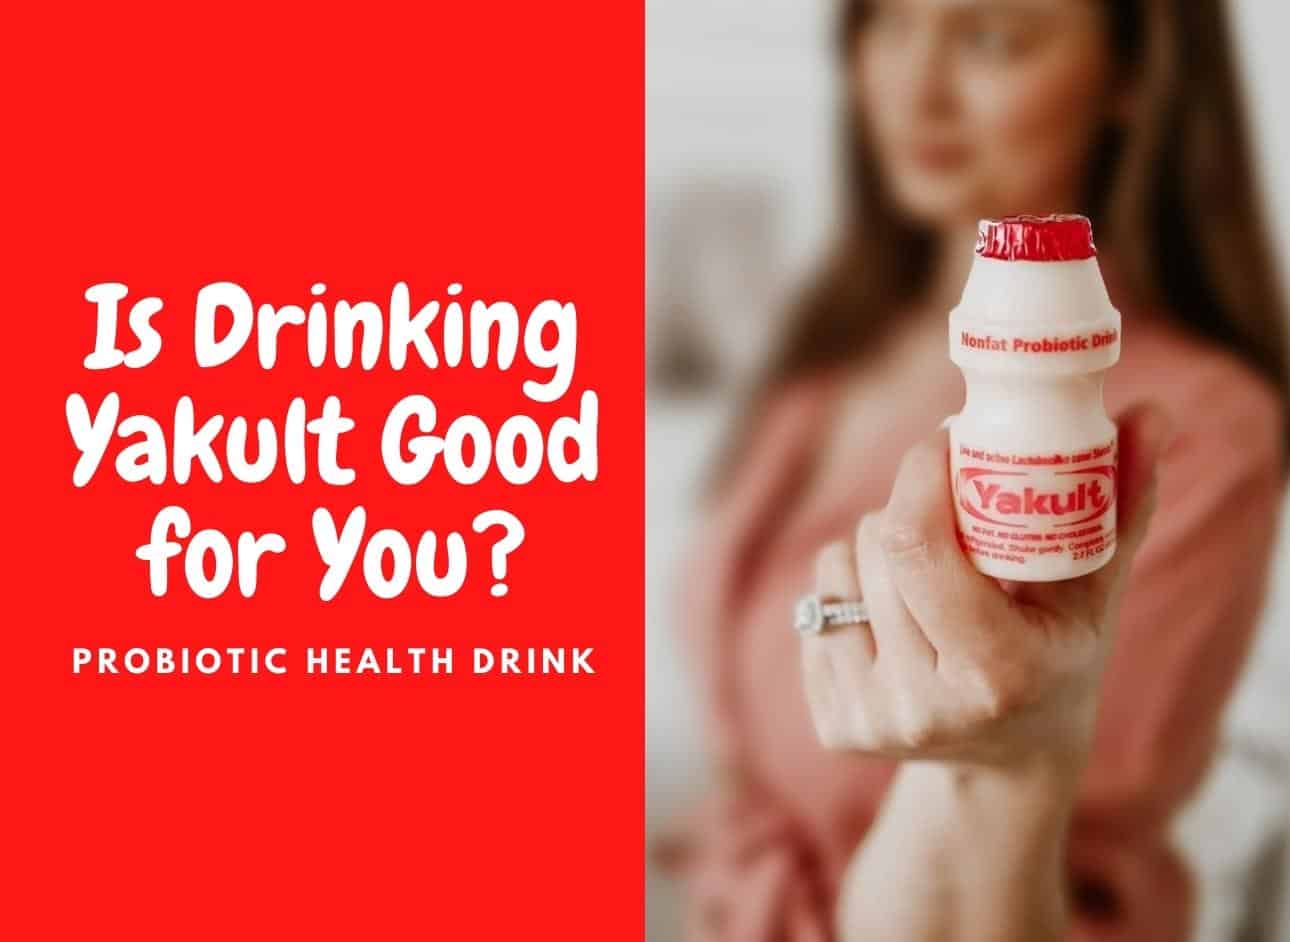 Is Yakult Good for You? Probiotic Health Drink’s Pros and Cons